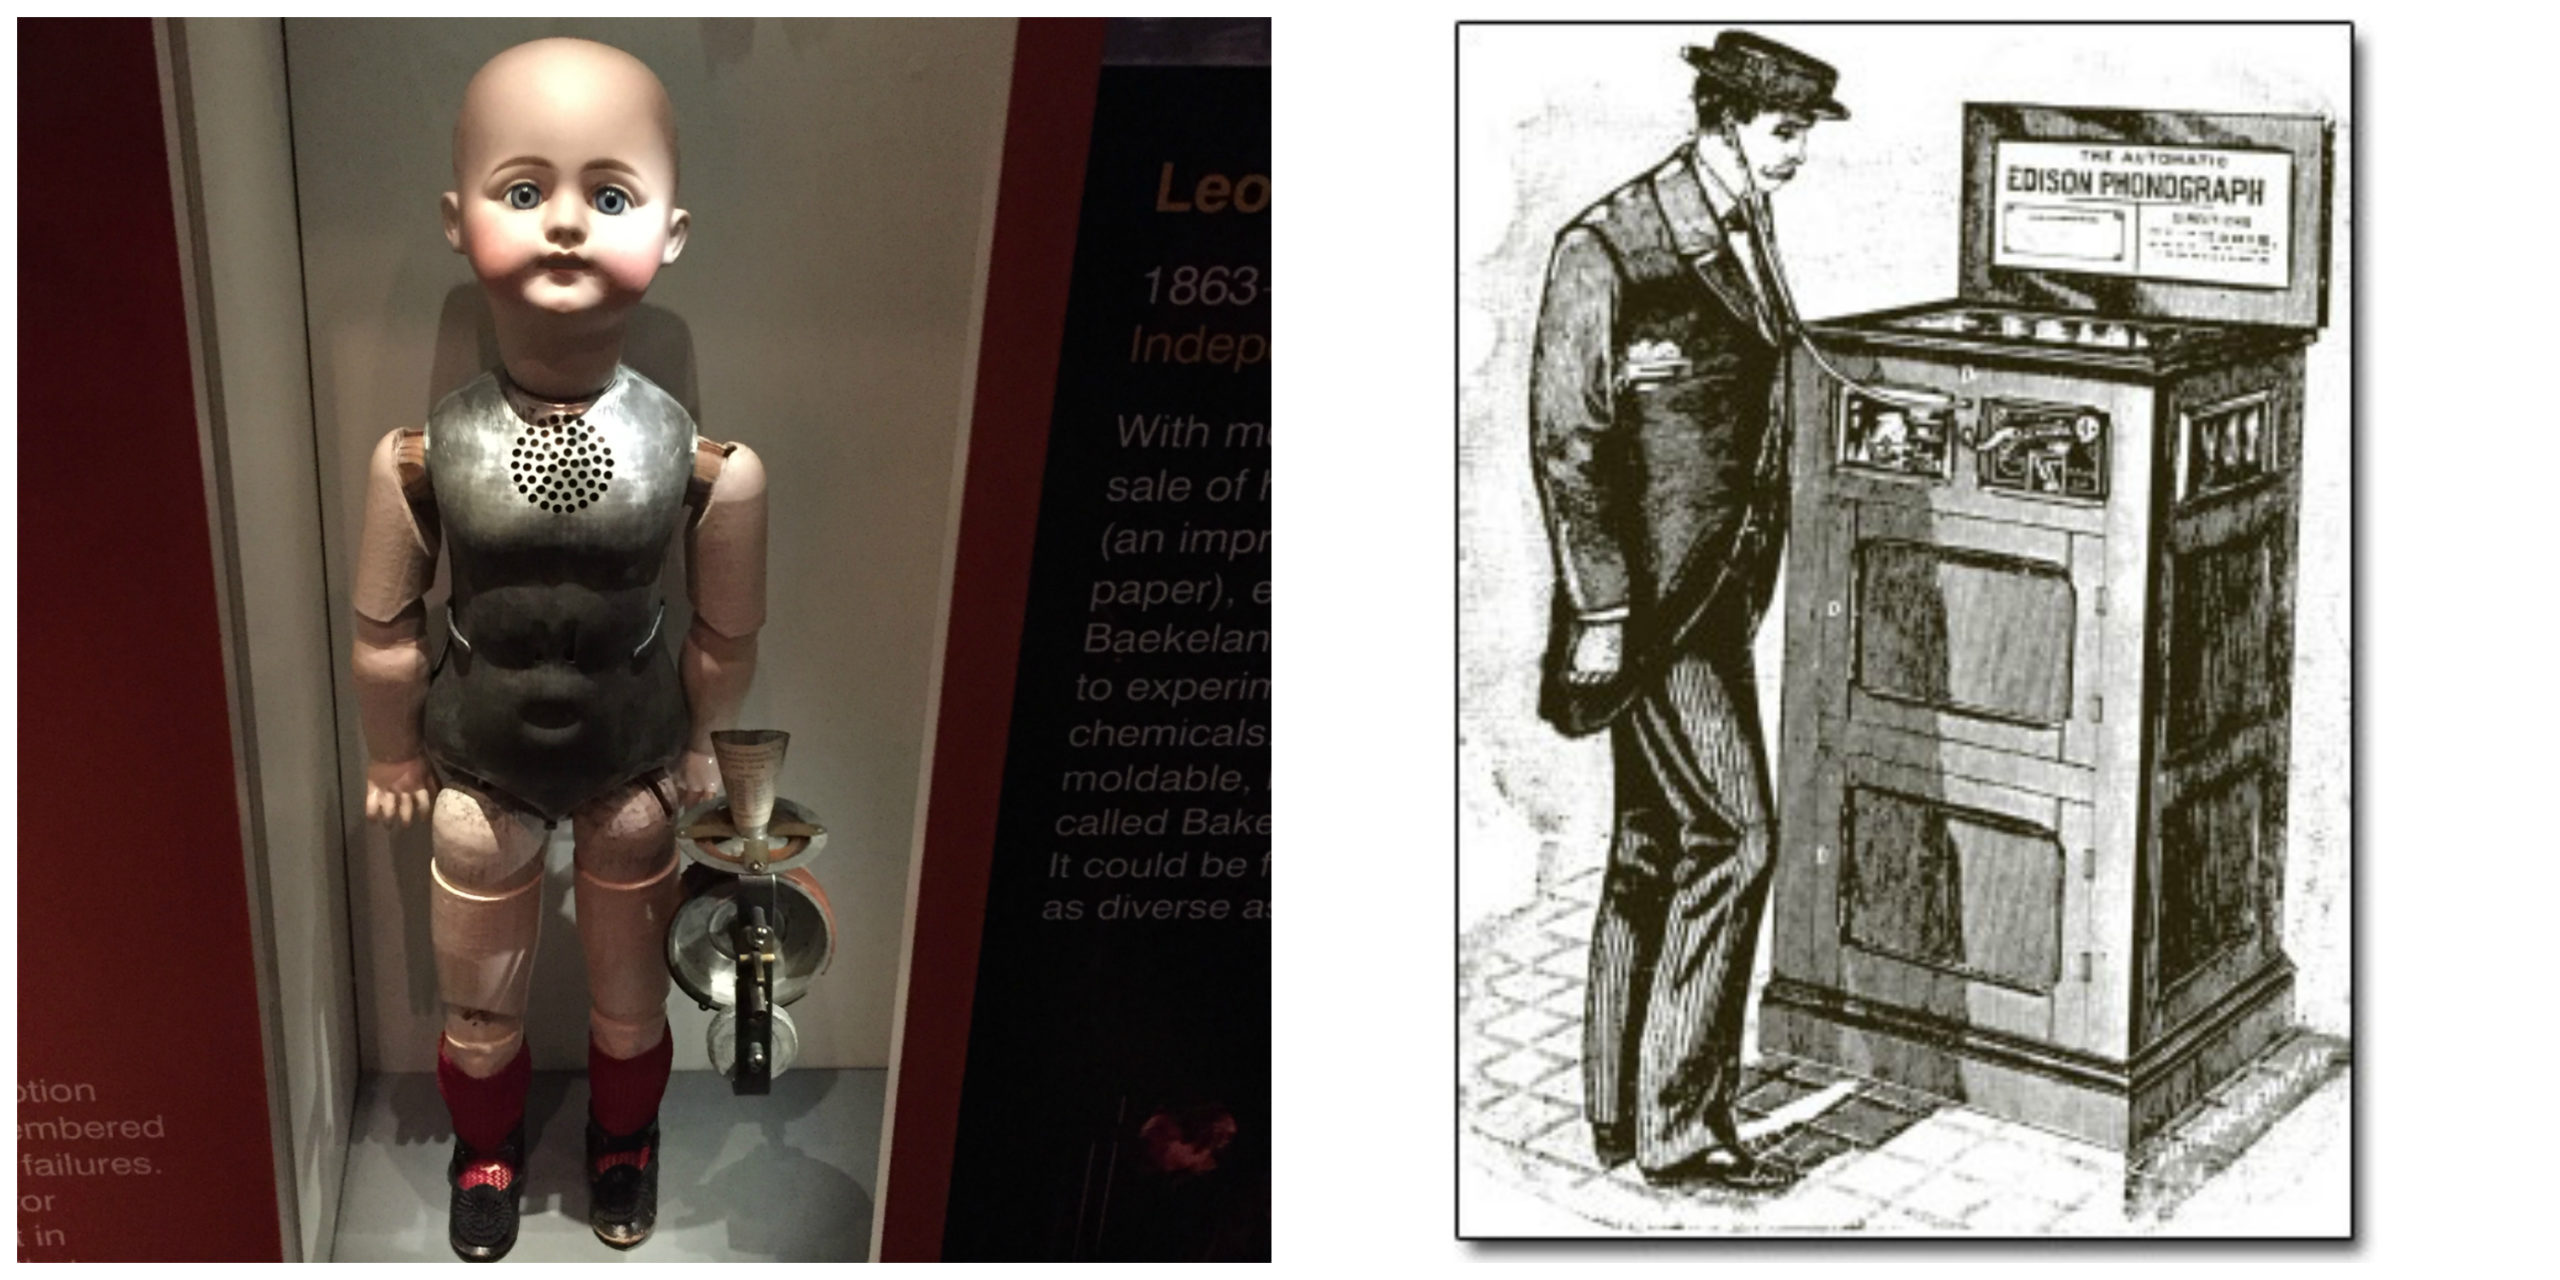 Left: A baby doll with porcelain head (bald), metal body with speaker area at top of torso, and articulated wooden limbs. Right: A 19th-century drawing of a man standing in front of a large cabinet Edison phonograph with what look like earphones plugged into the machine.